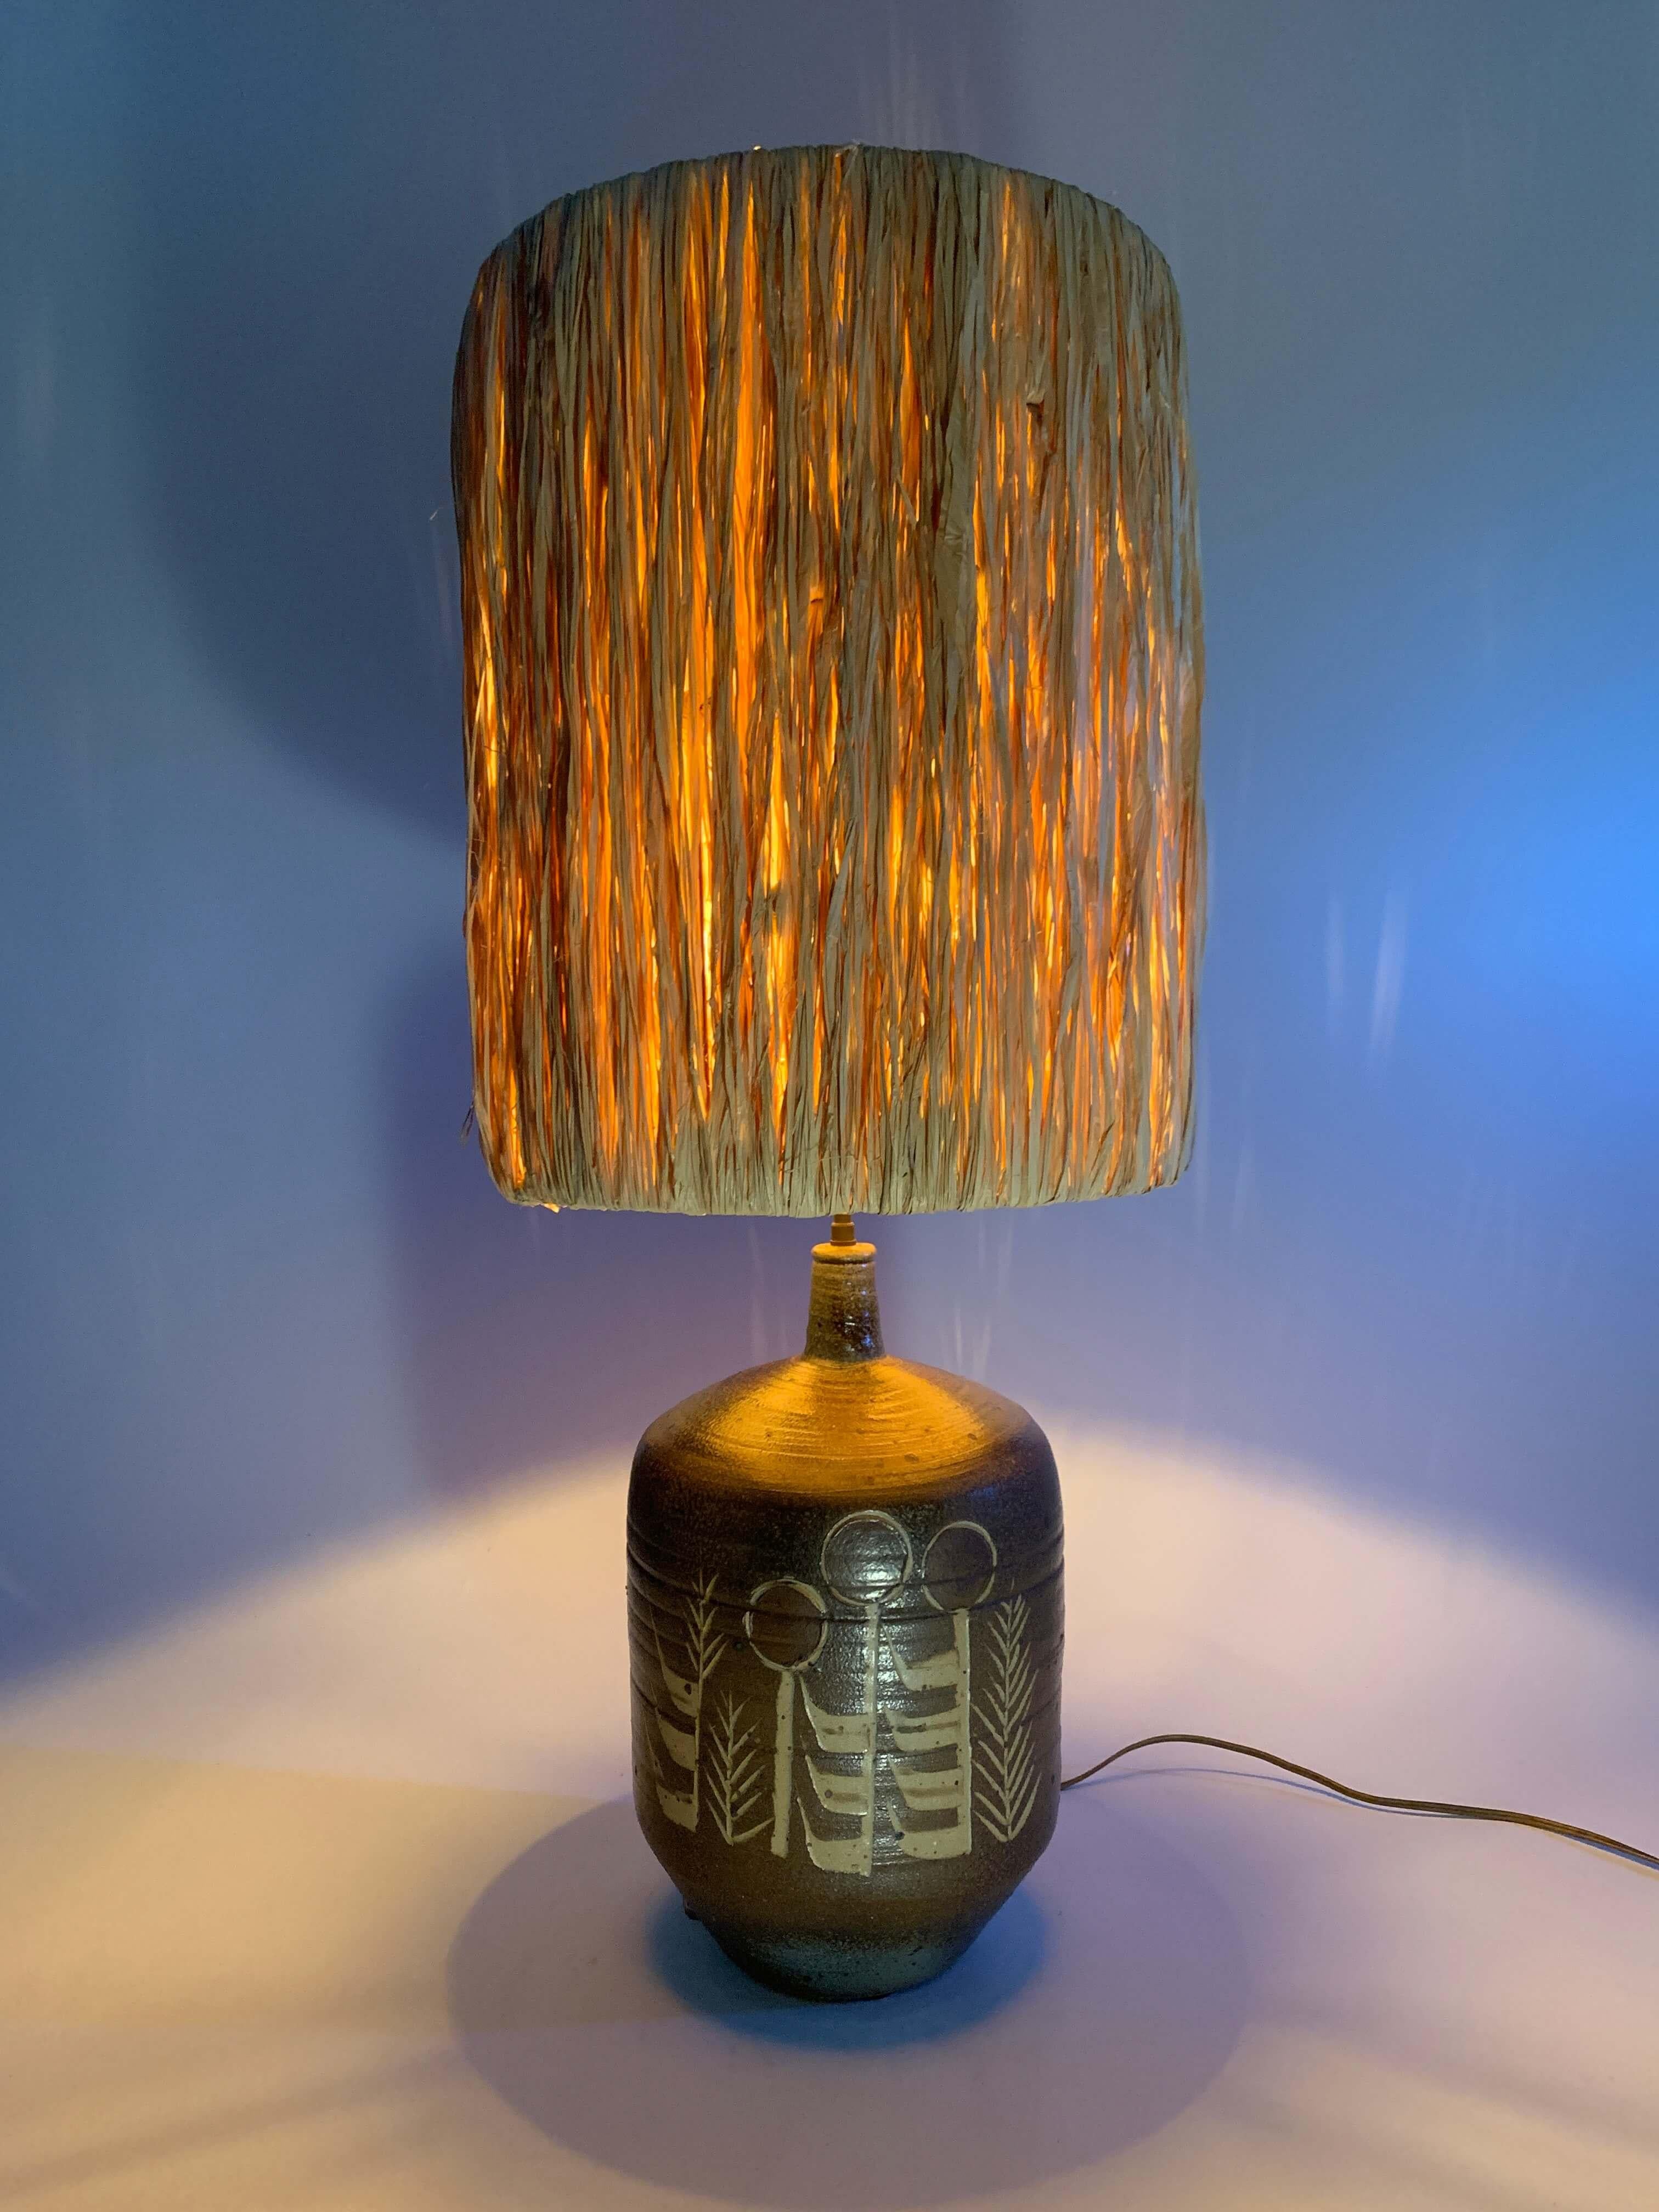 Pierre Digan (1941-2016), artist from La Borne in France, was renowned for his sandstone creations.
Rare large table lamp in pyrite sandstone, 
Unique piece 
 Dimensions excluding socket and lampshade : H 38 cm x D 23 cm. 